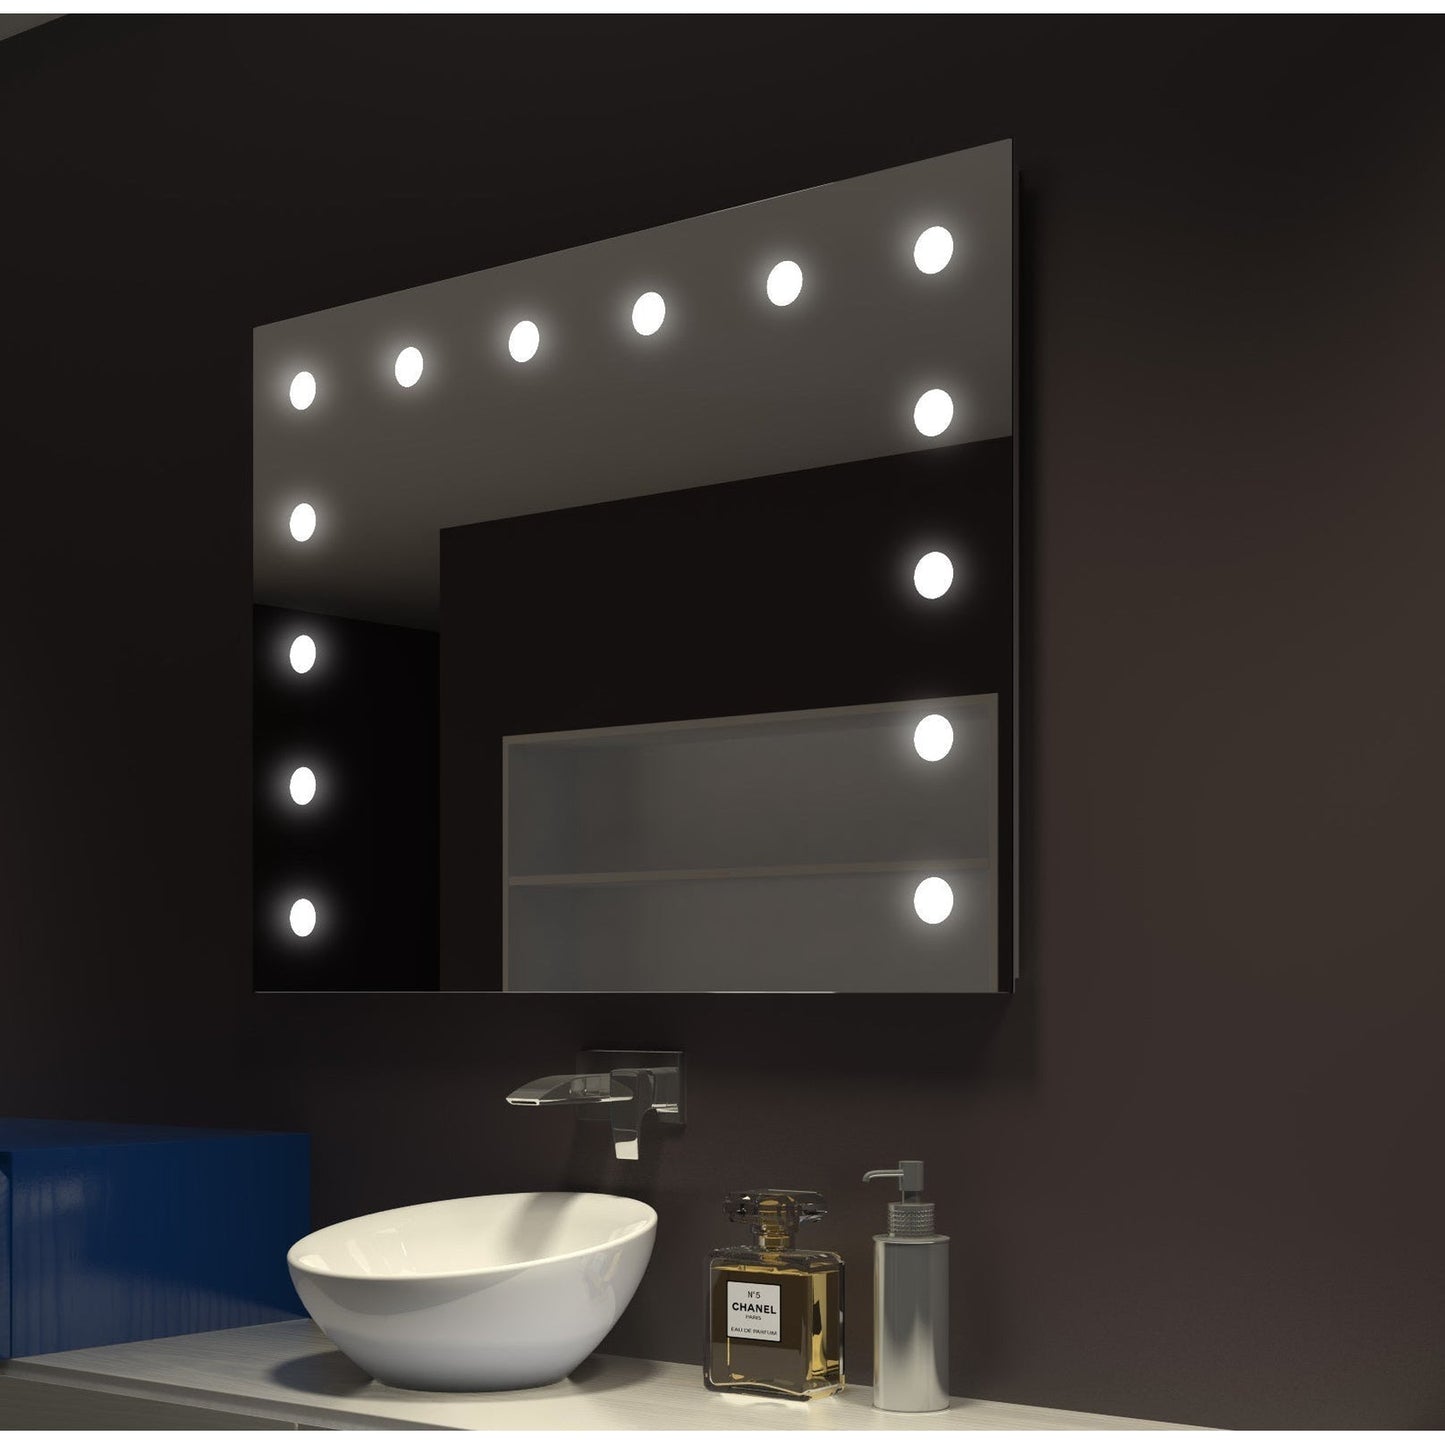 Paris Mirror Hollywood 48" x 36" Front-Lit Lighted Super Bright Dimmable Wall-Mounted 6000K LED Mirror